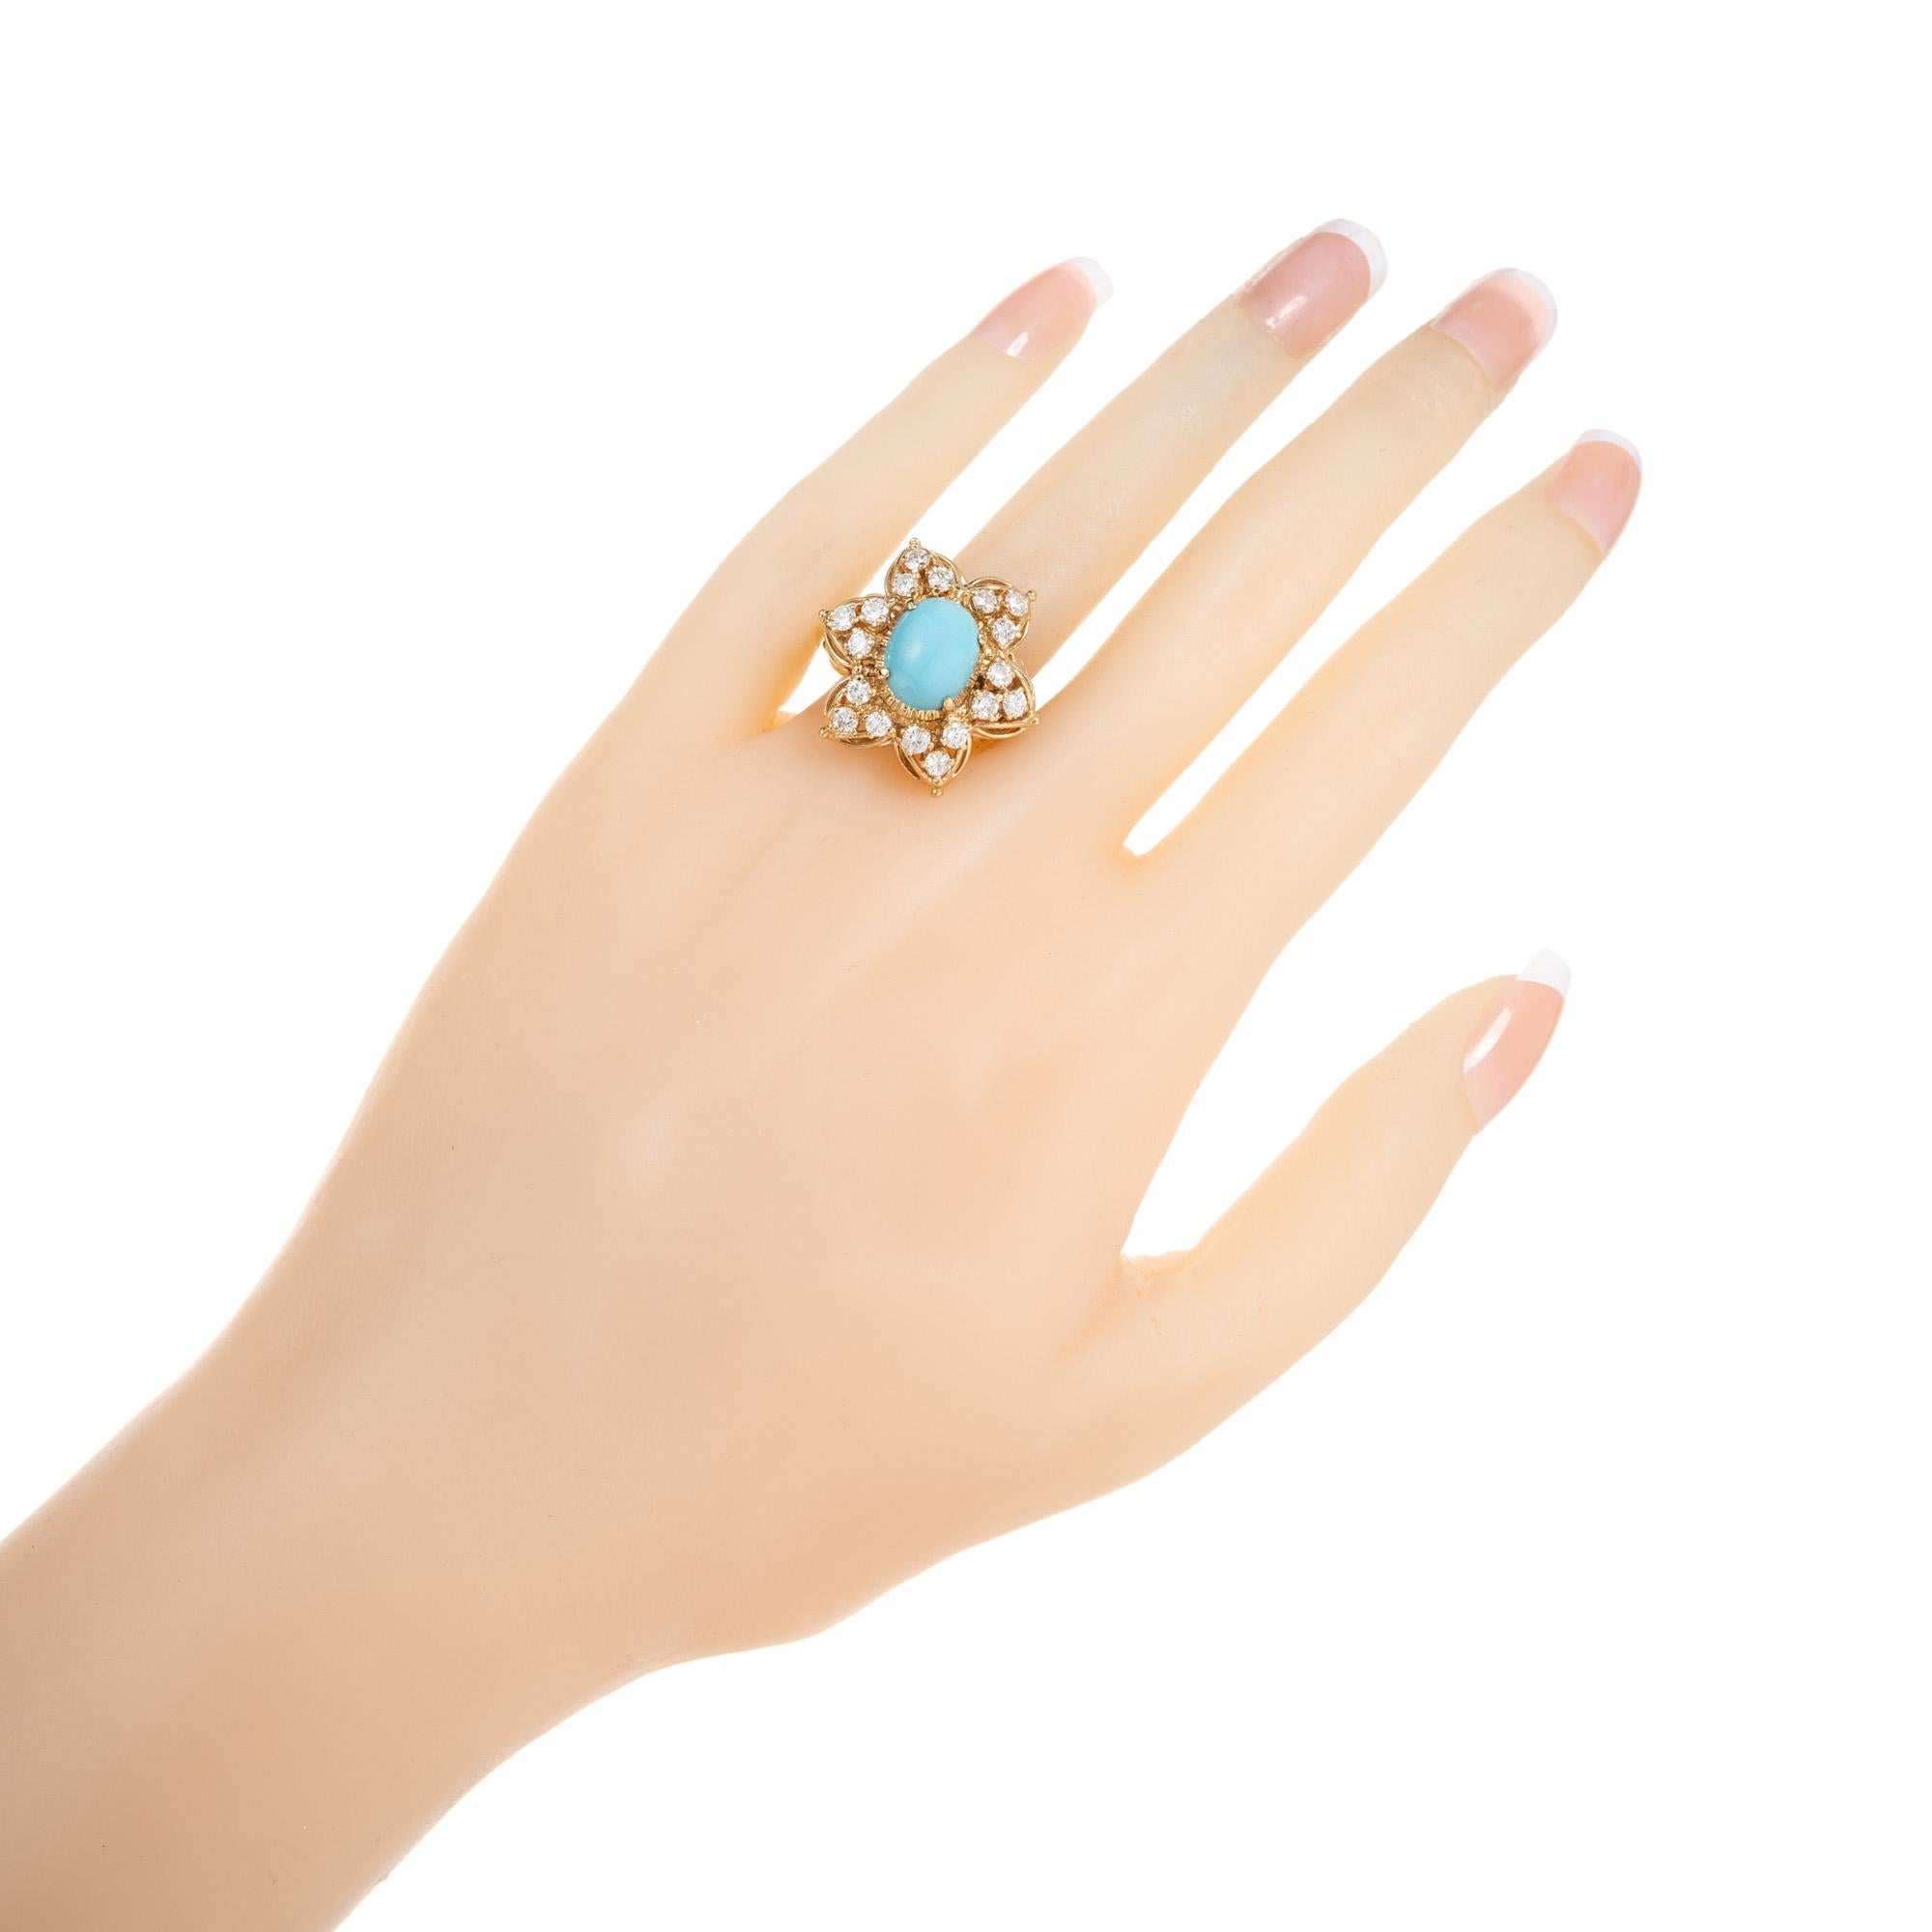 persian turquoise ring